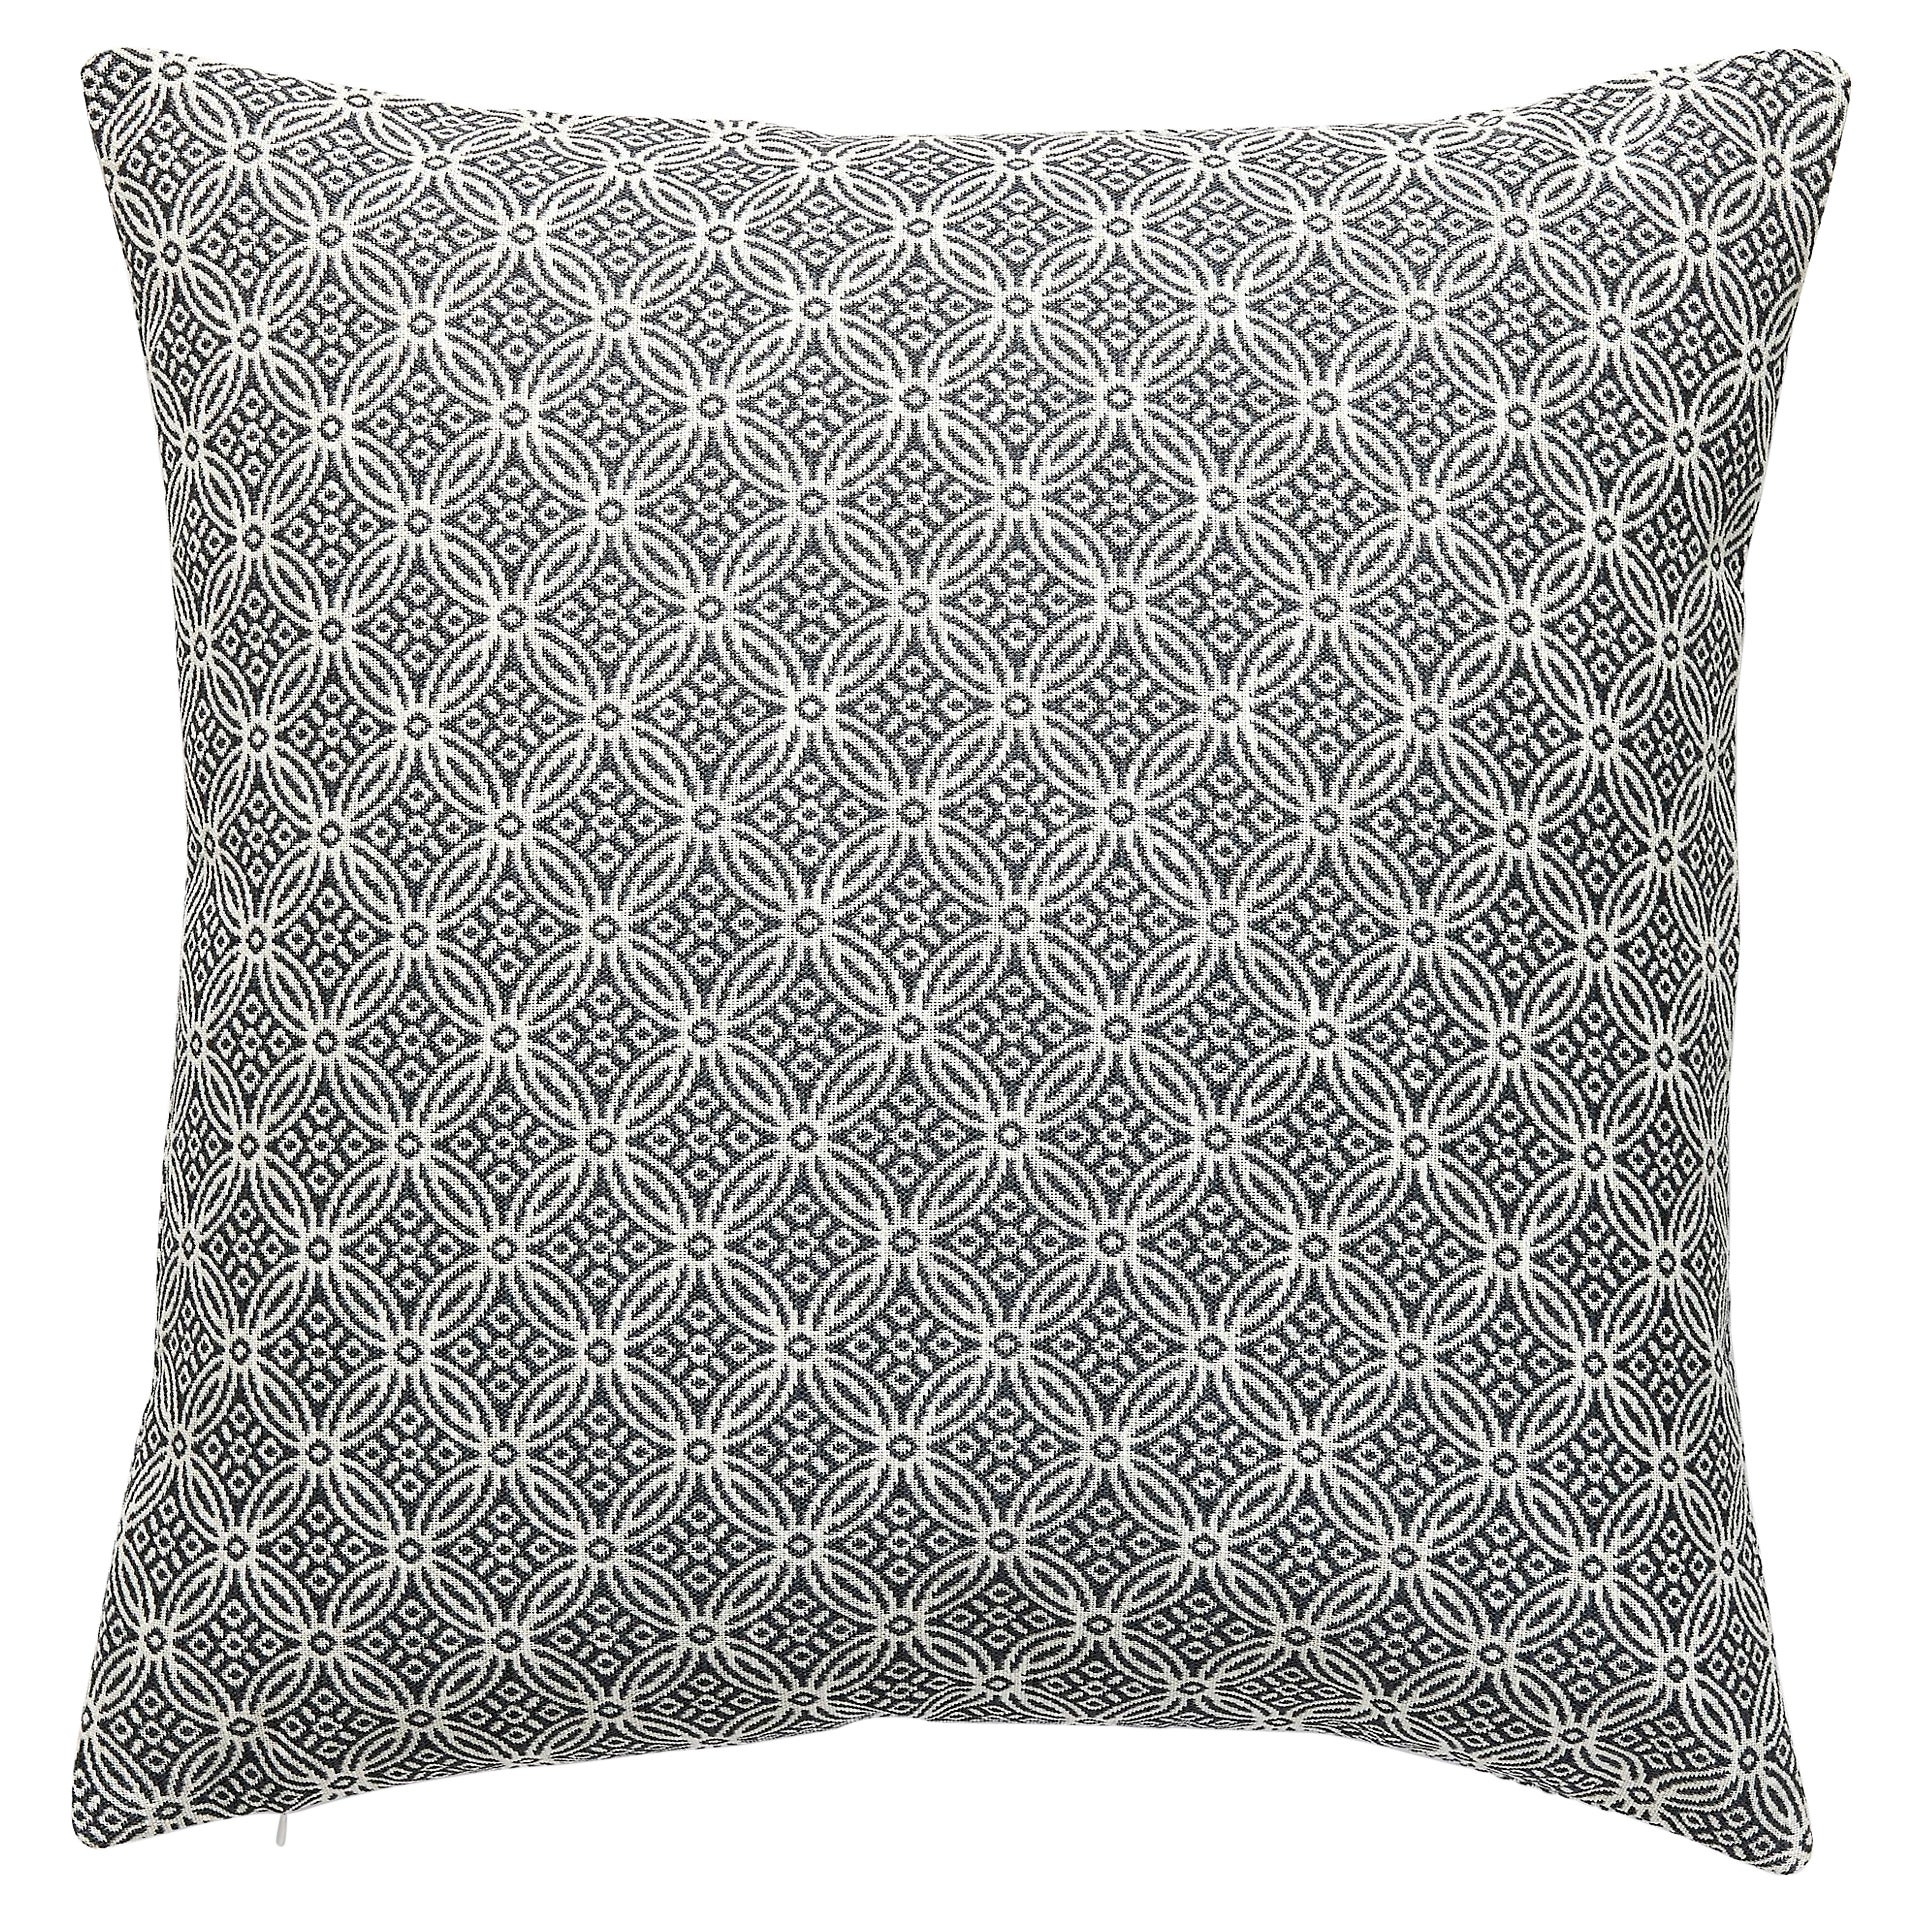 Cape May Outdoor Pillow